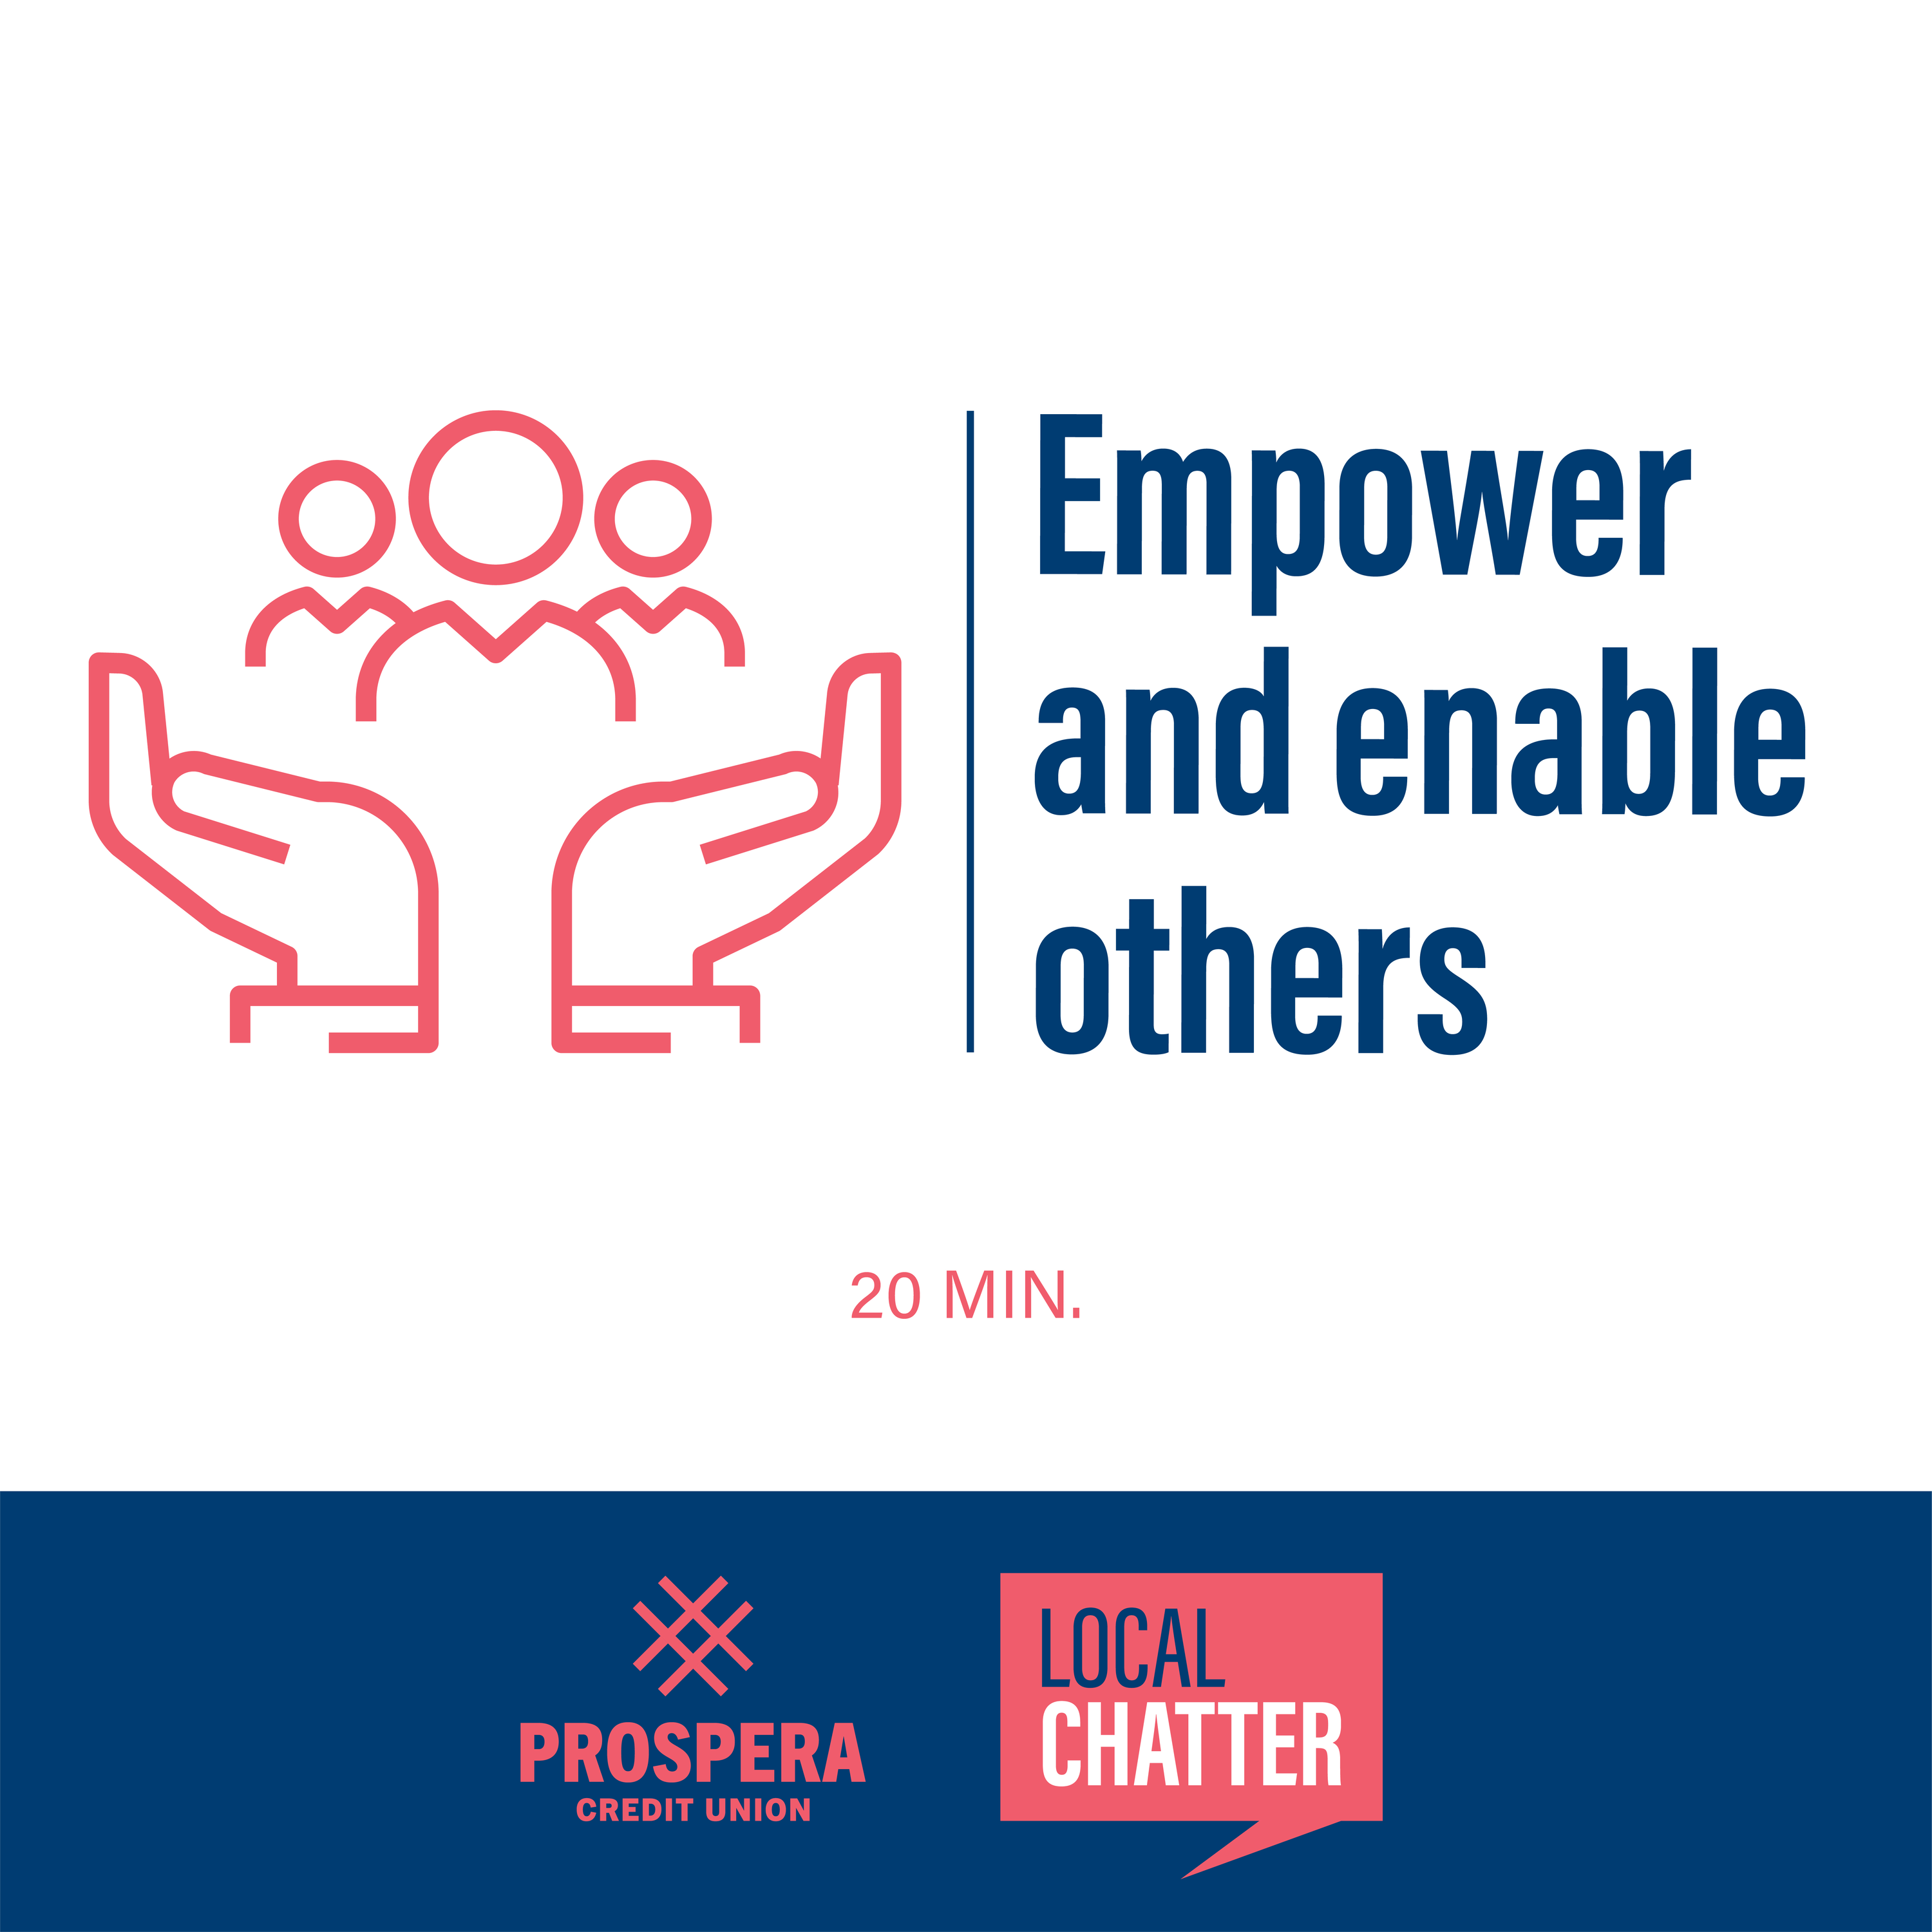 Empower and enable others